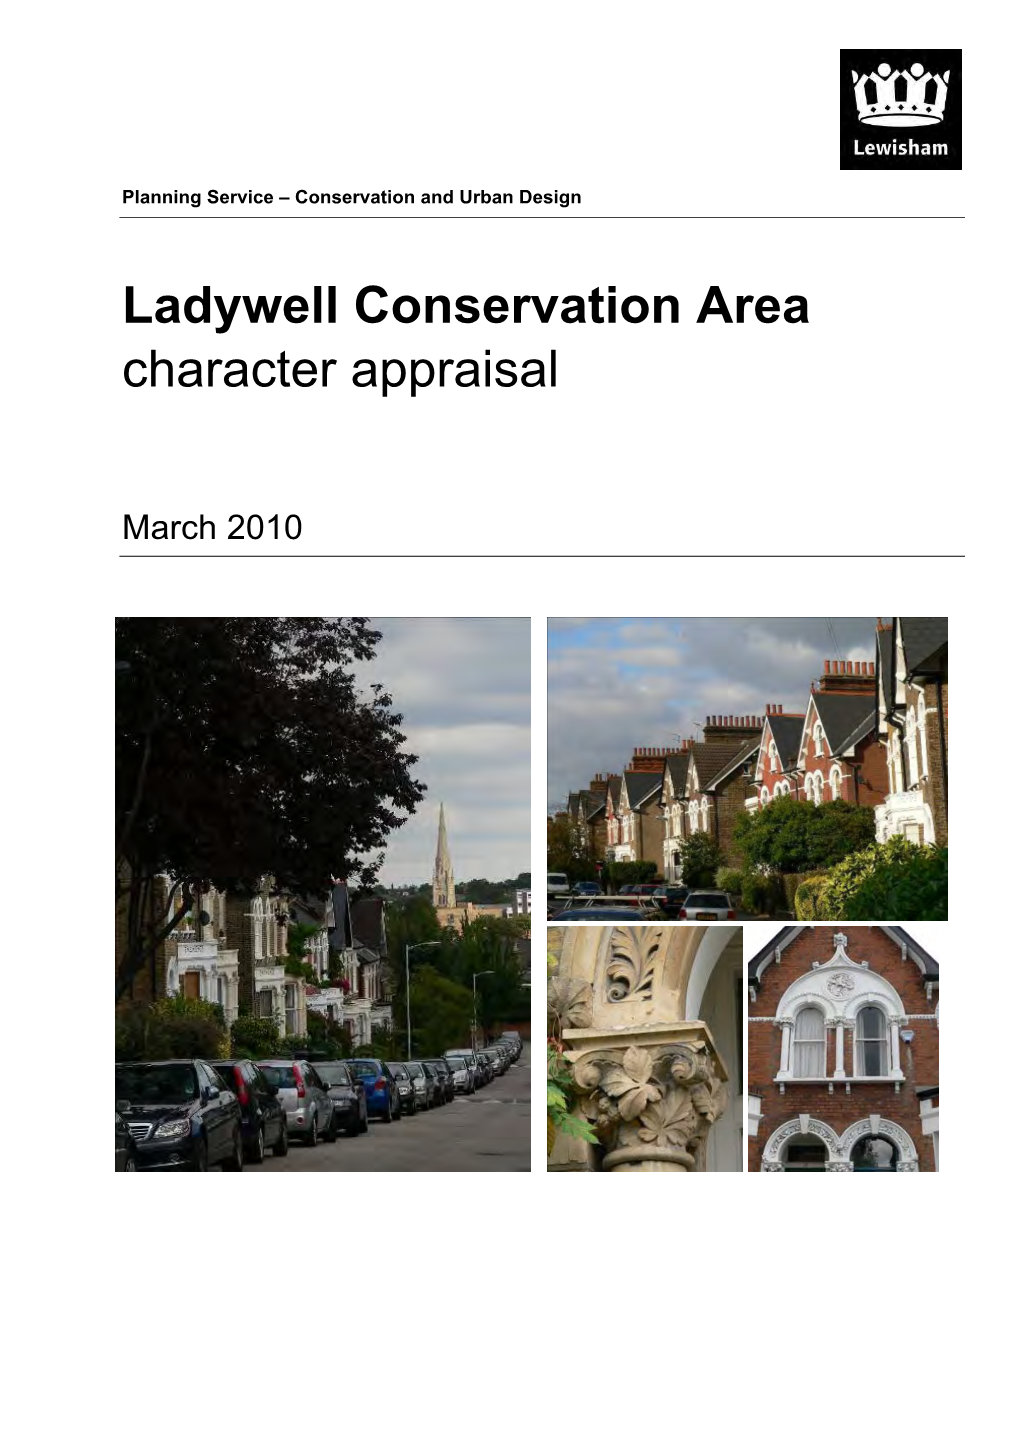 Ladywell Conservation Area Character Appraisal